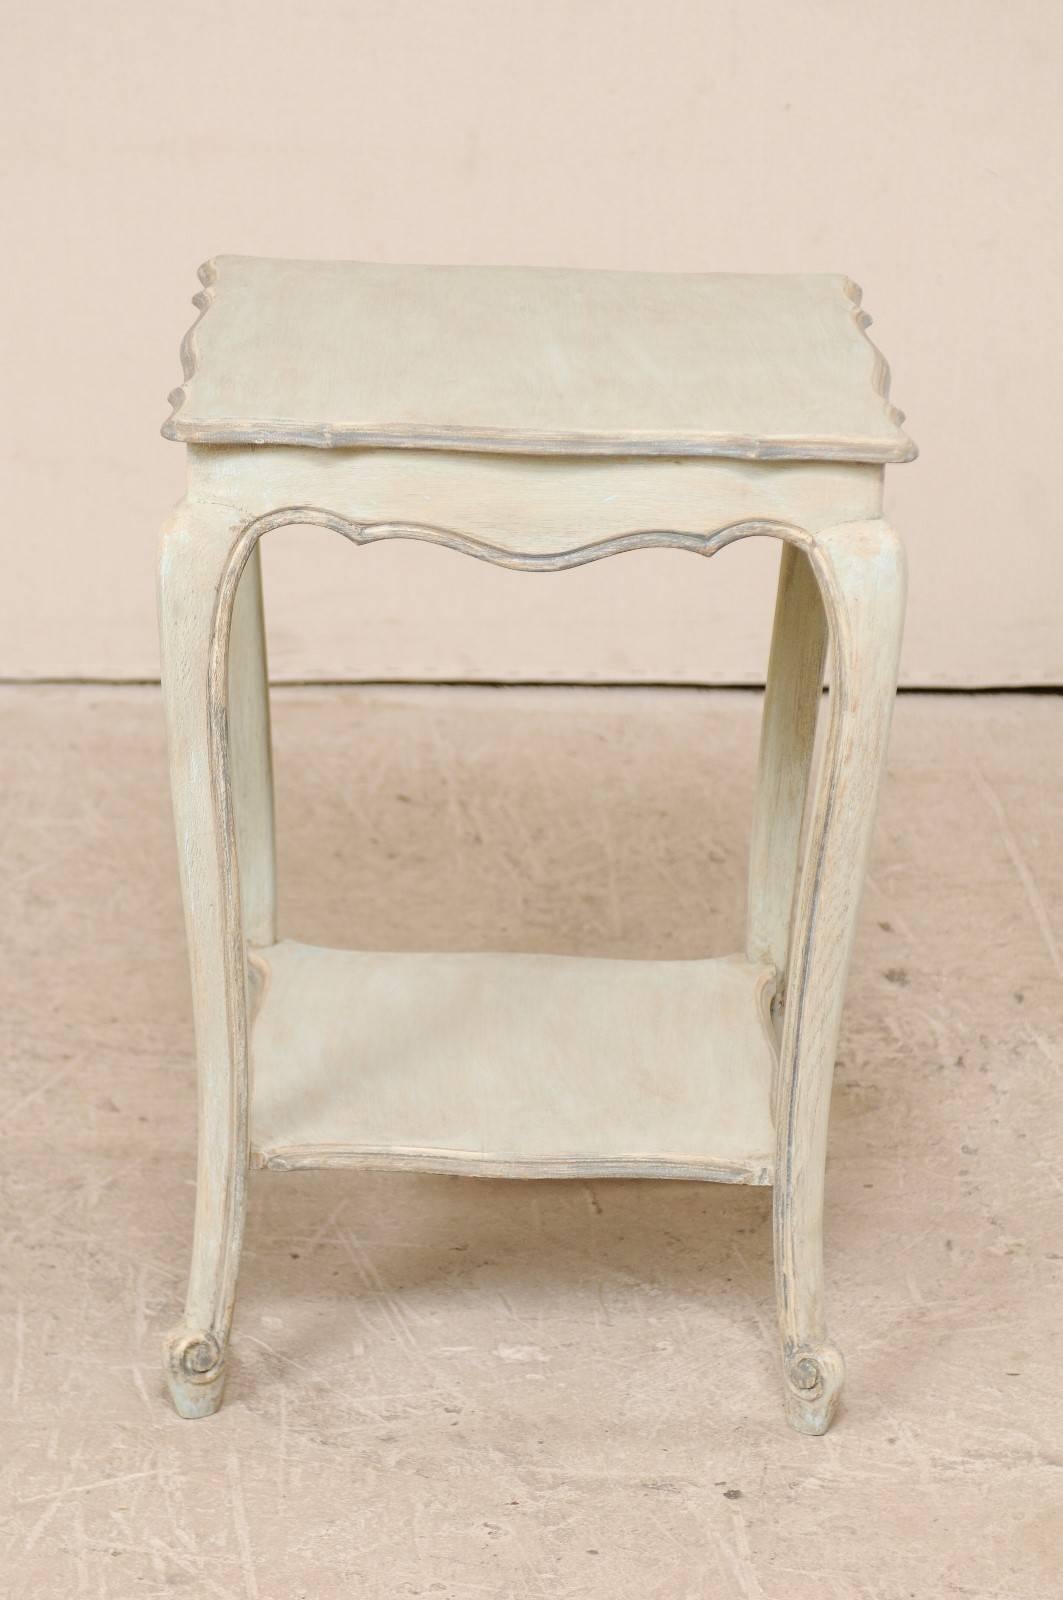 Vintage French Early 20th Century Painted Wood Side Table in Soft Pale Blue-Grey 4